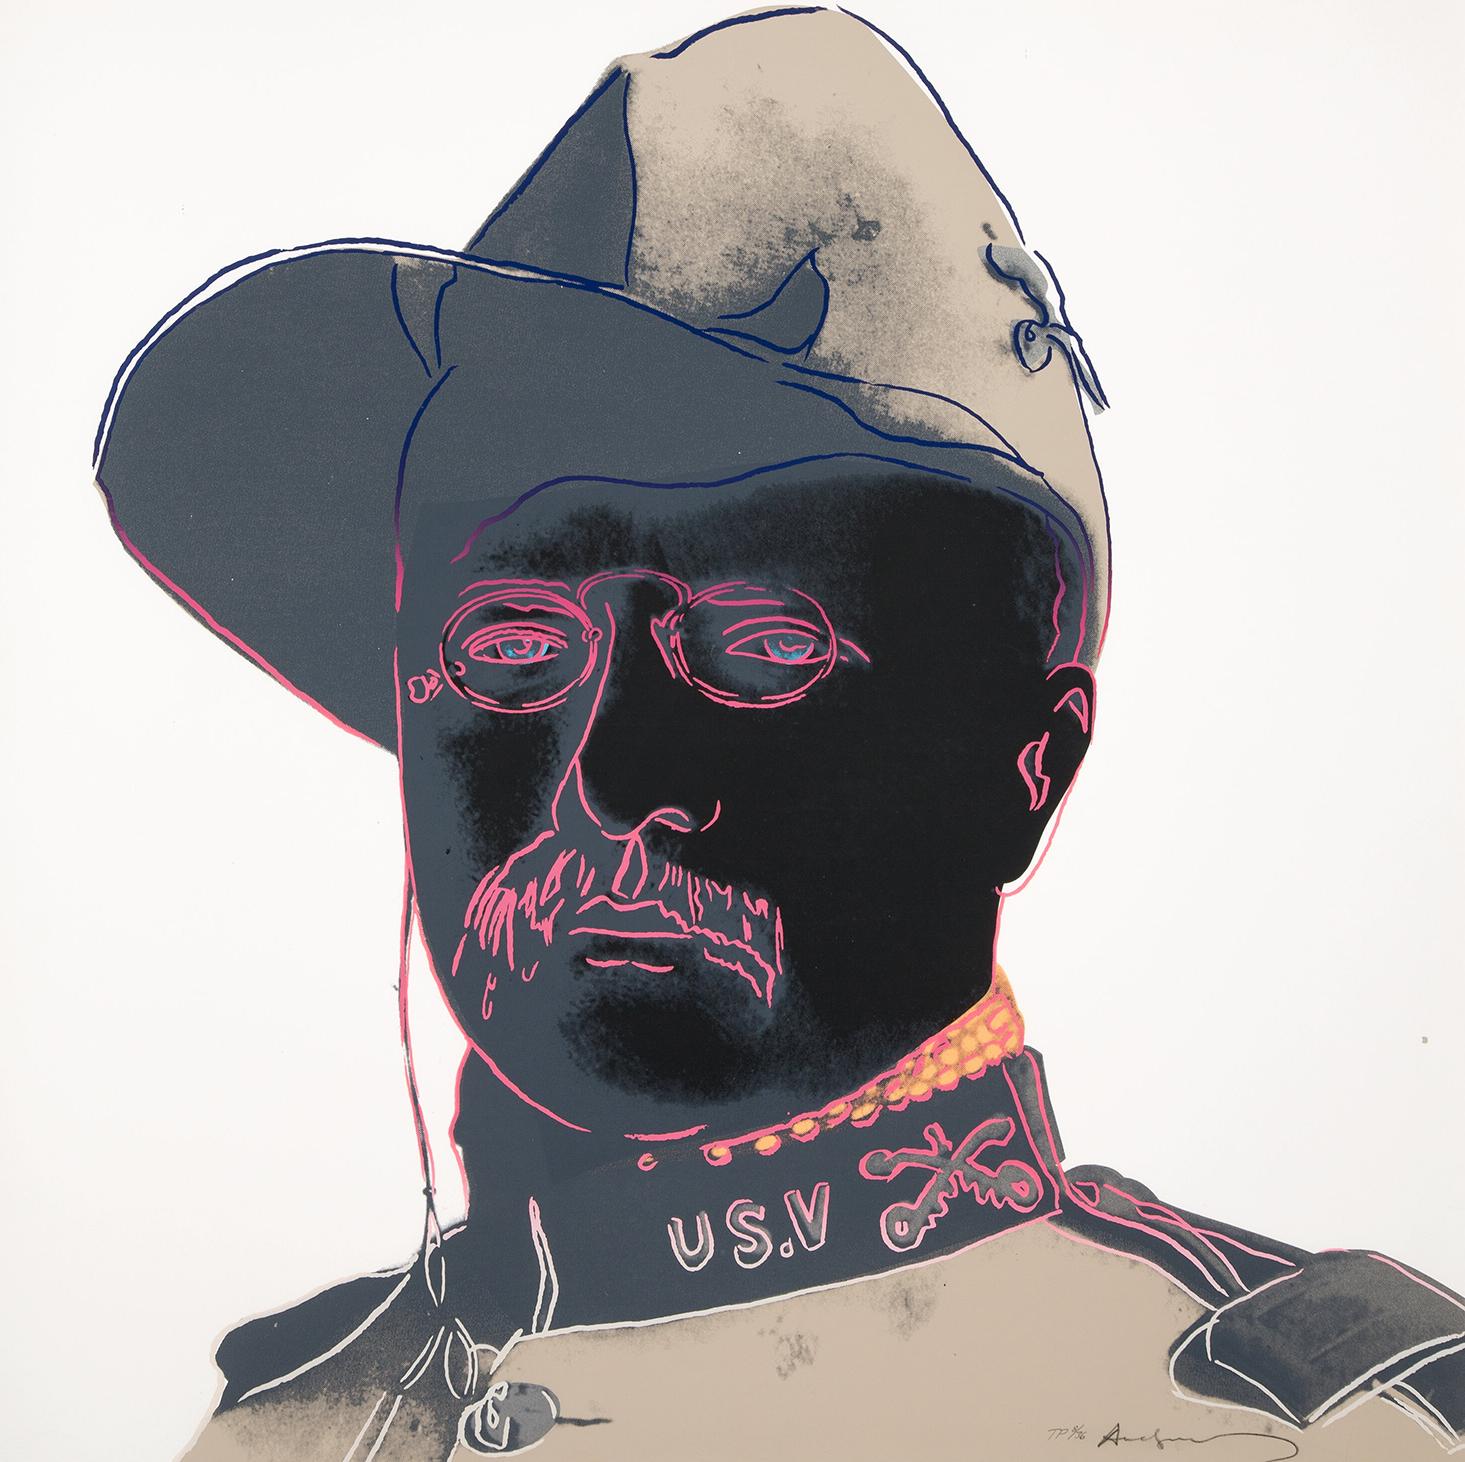 Andy Warhol Portrait Print - Teddy Roosevelt, from the Cowboys and Indians Series, 1986